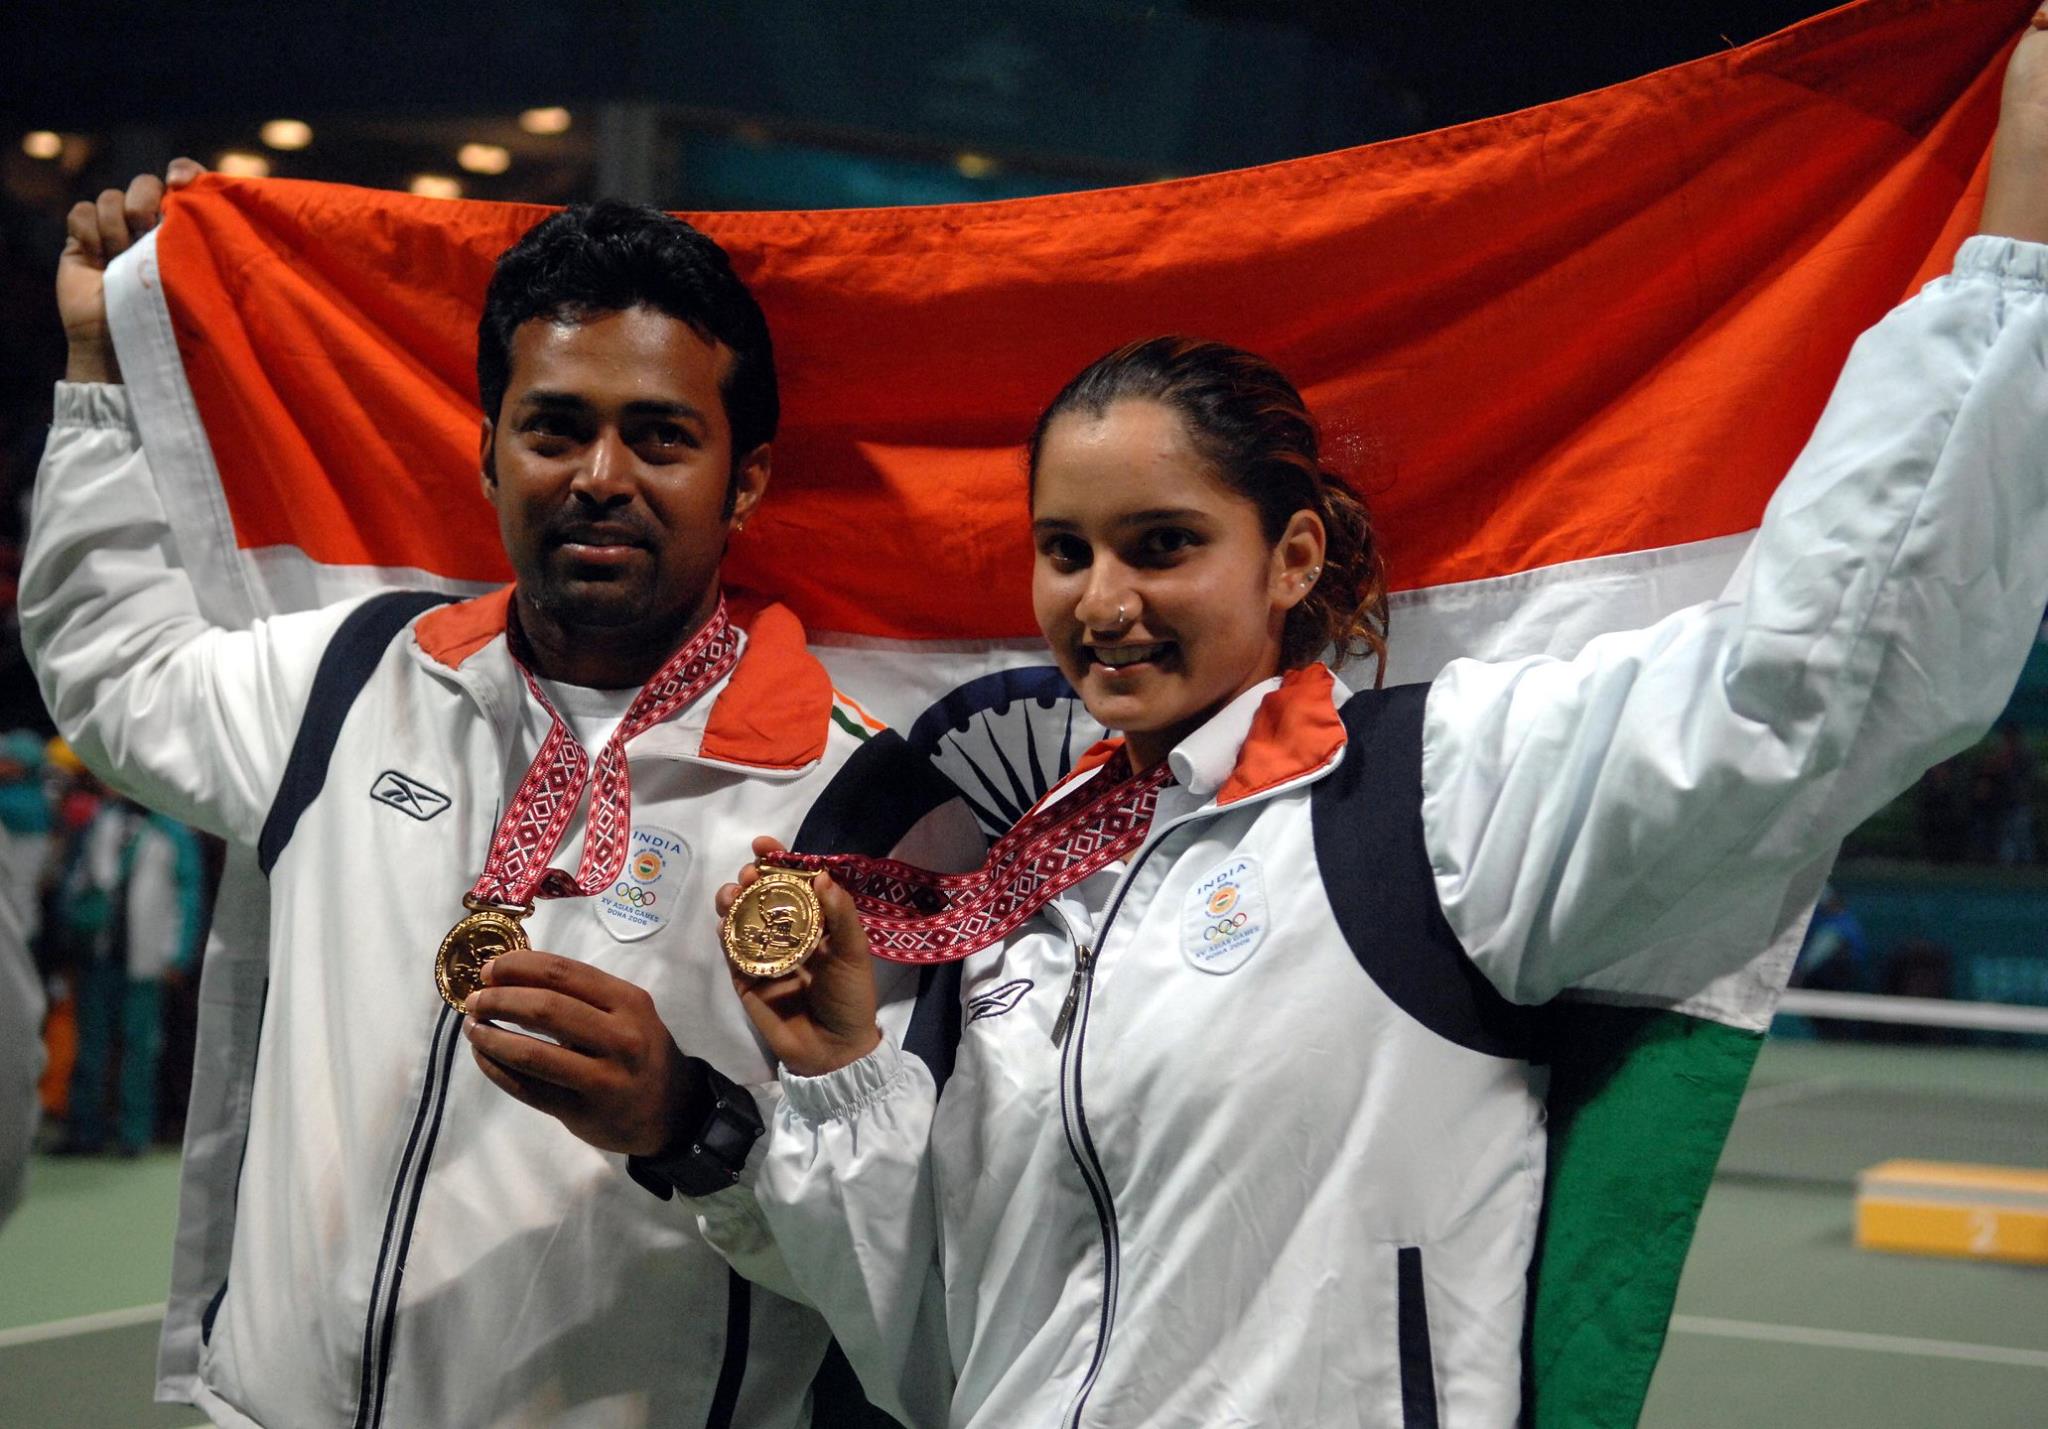 Has India's success in Doubles tennis destroyed its Singles hopes?